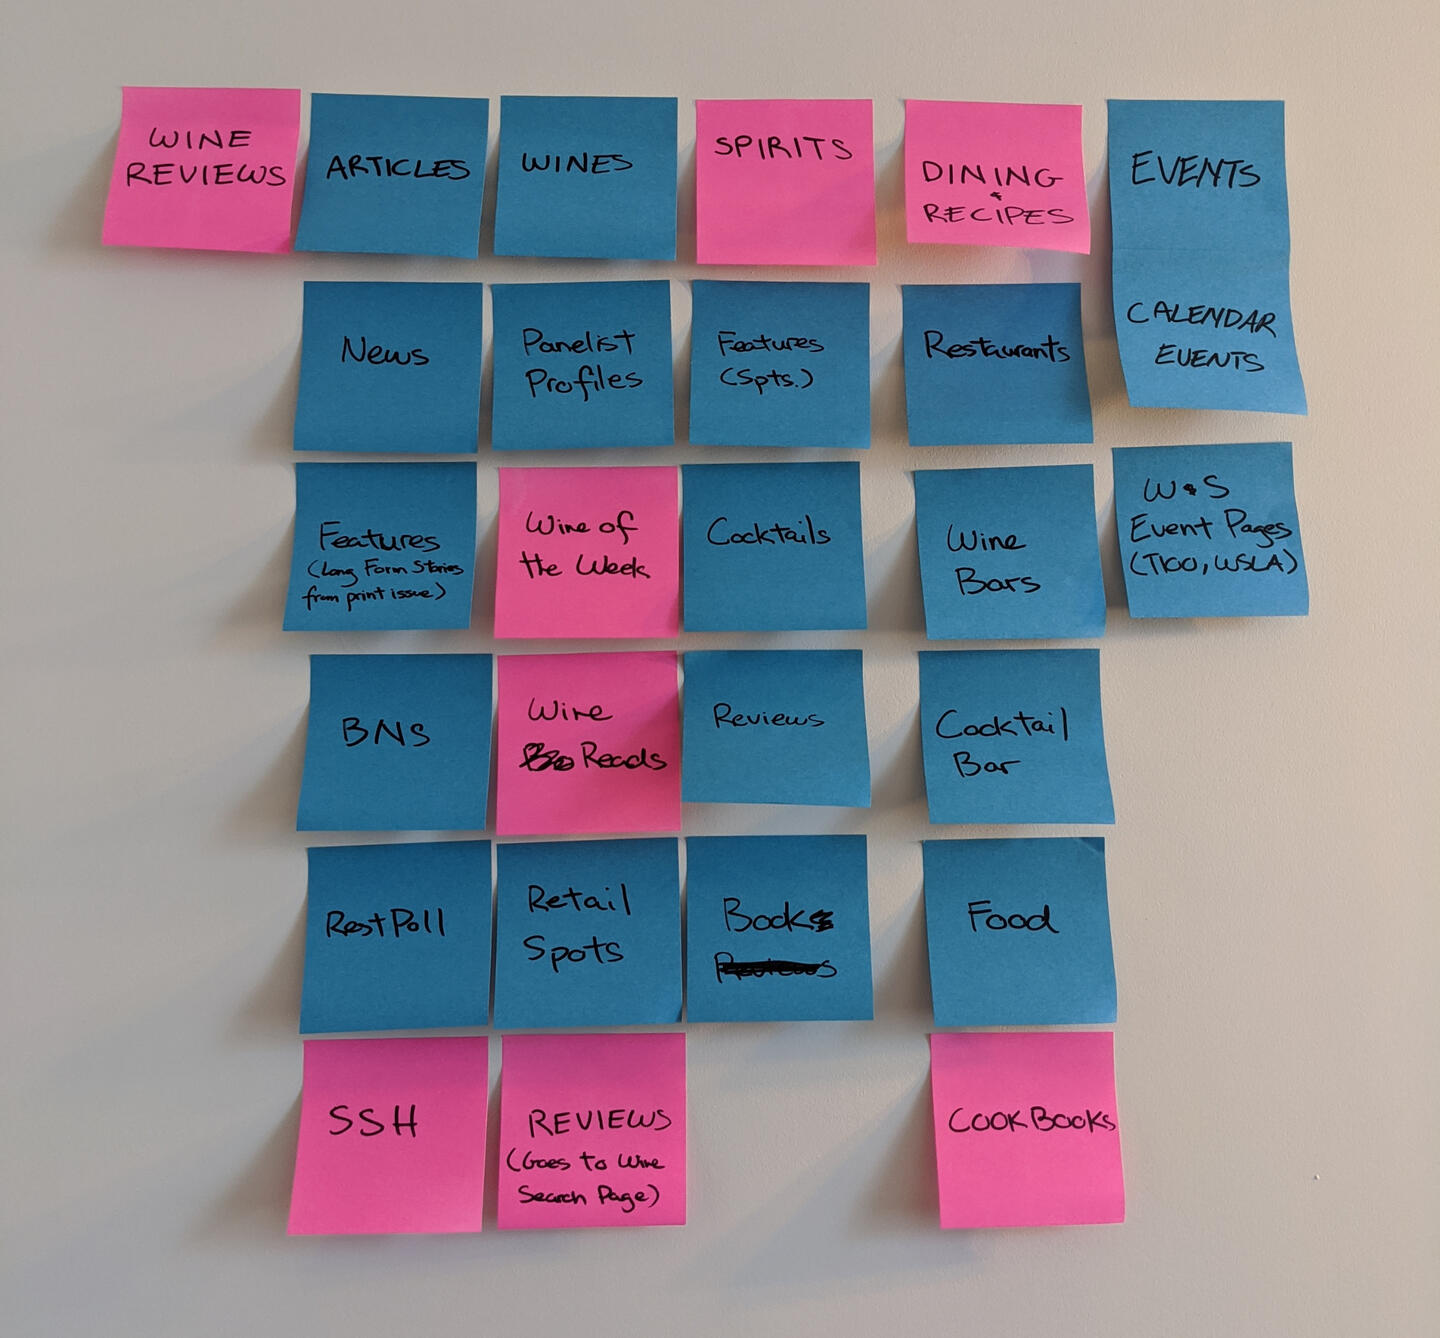 Post-its in reorganizing the website's navigation